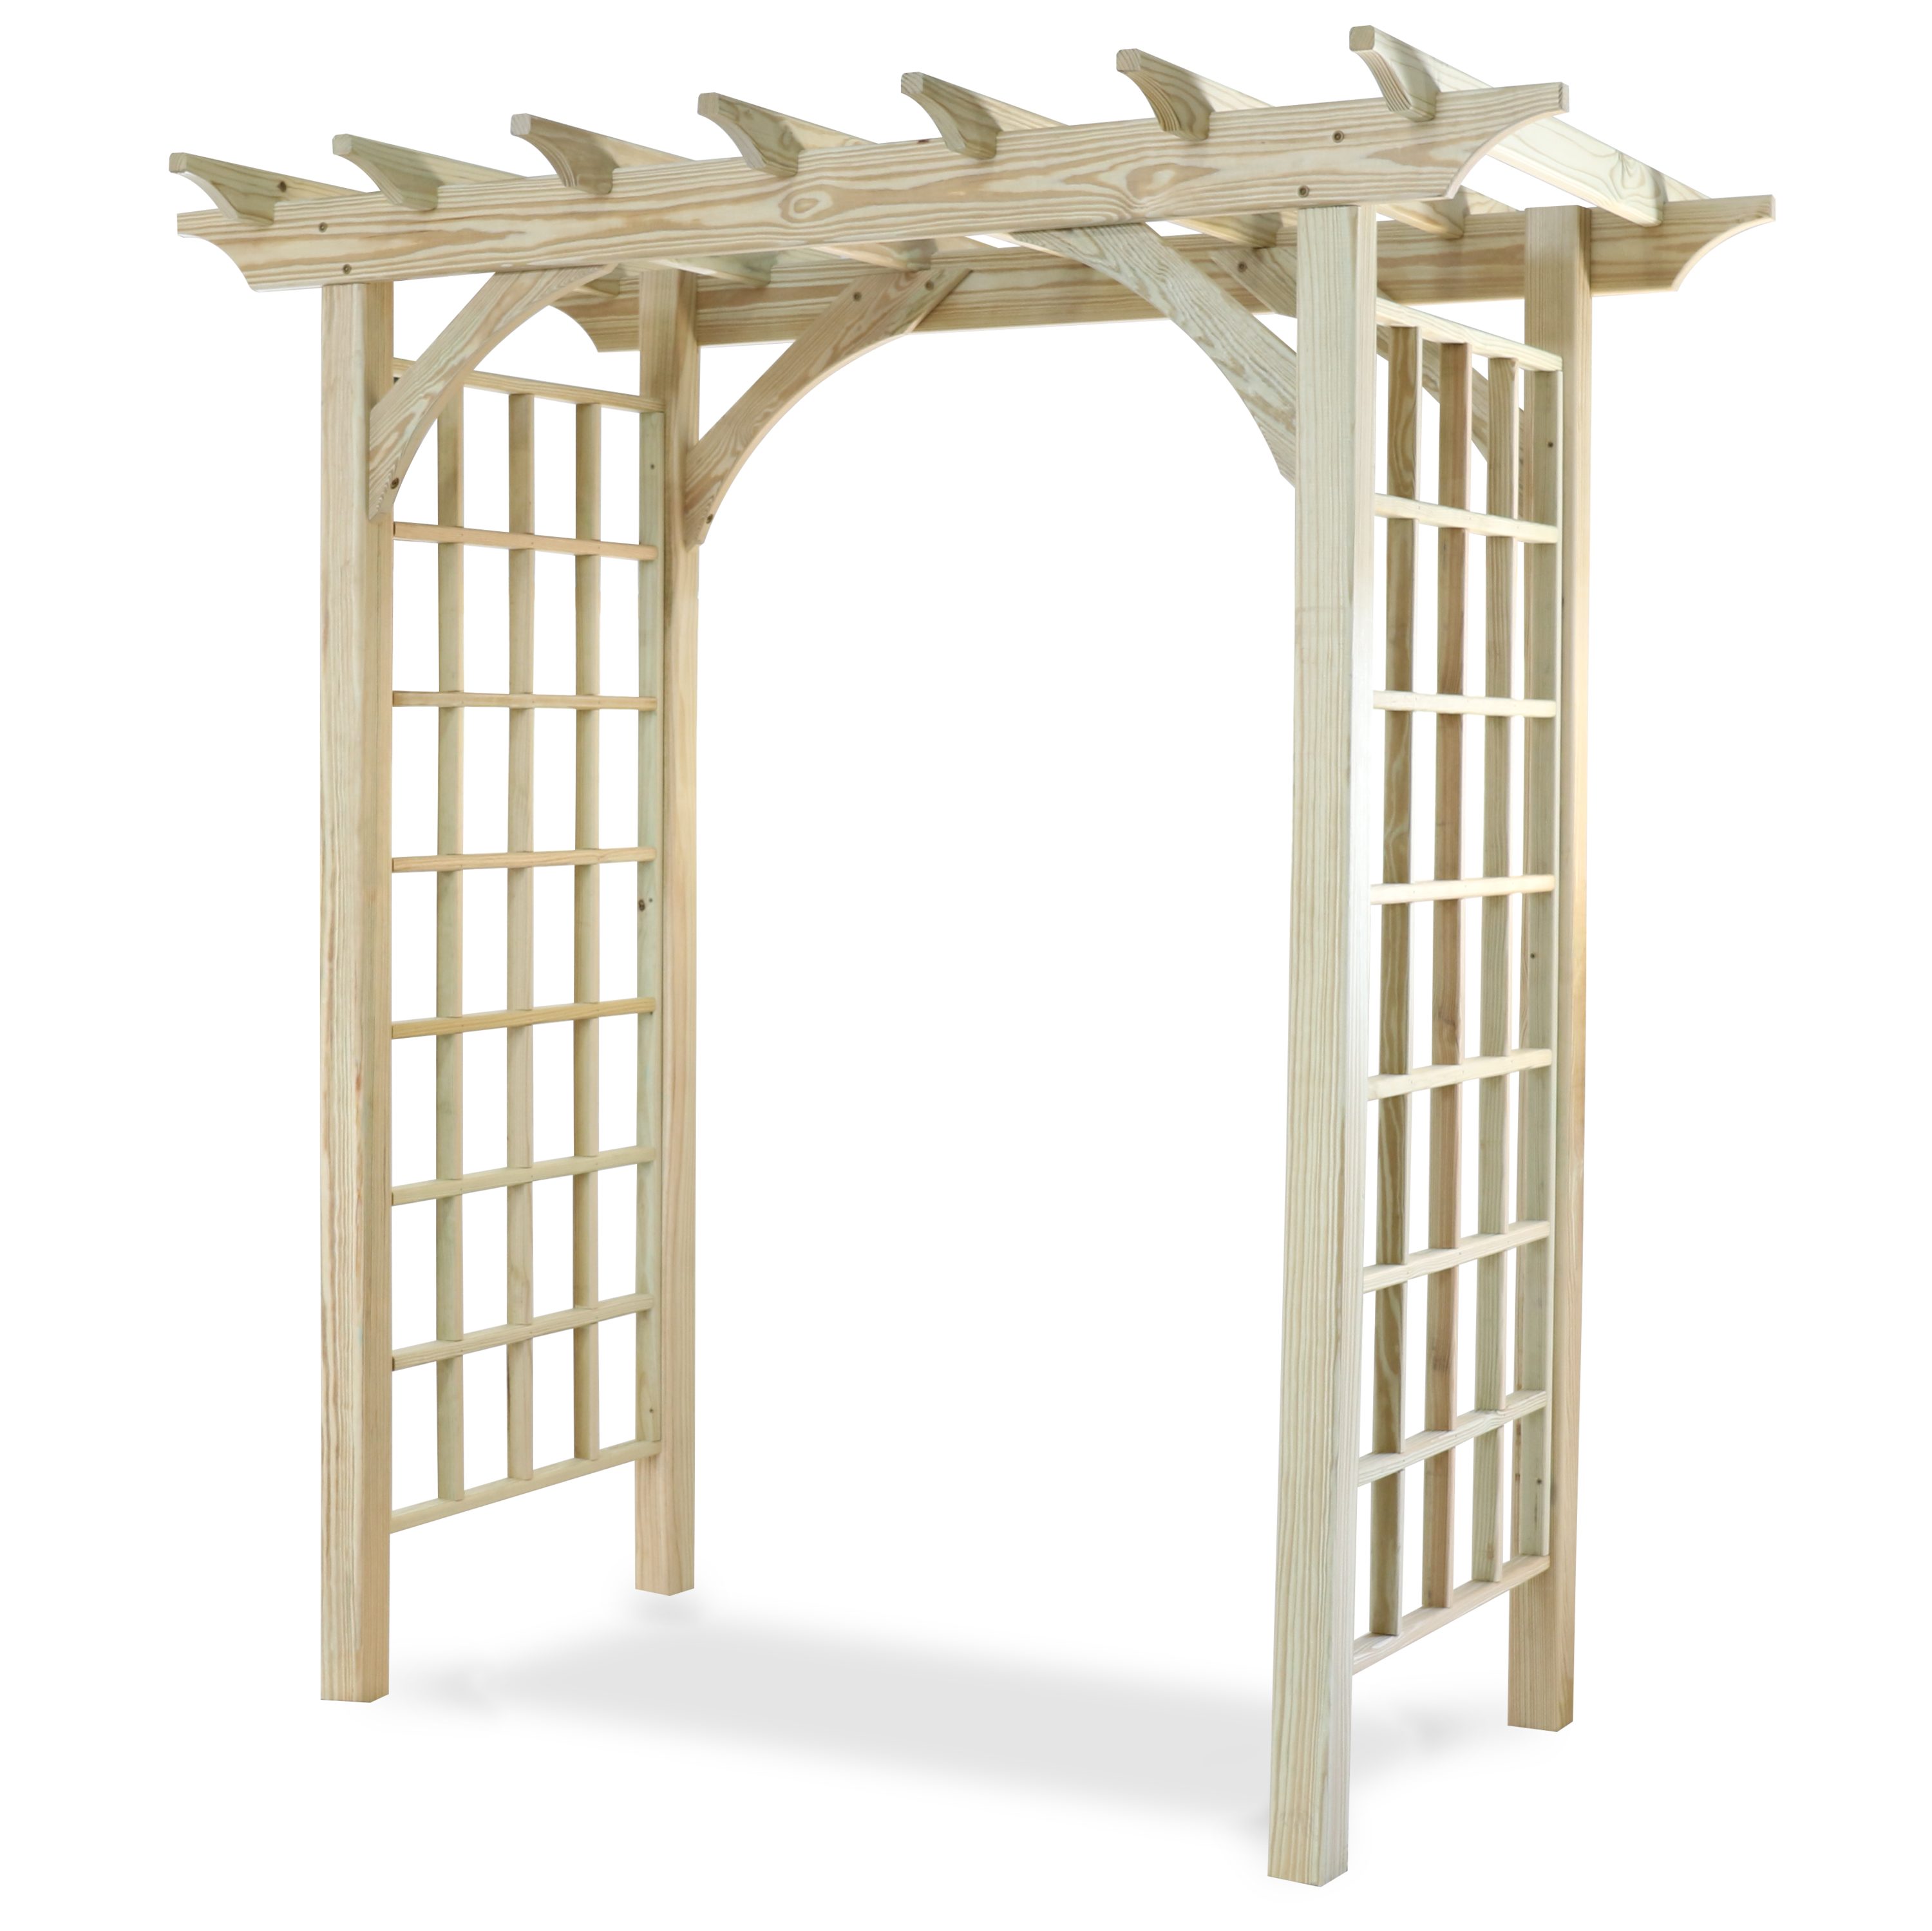 YardCraft Canterbury 7.41-ft W x 7.88-ft H Unfinished Garden Arbor at ...